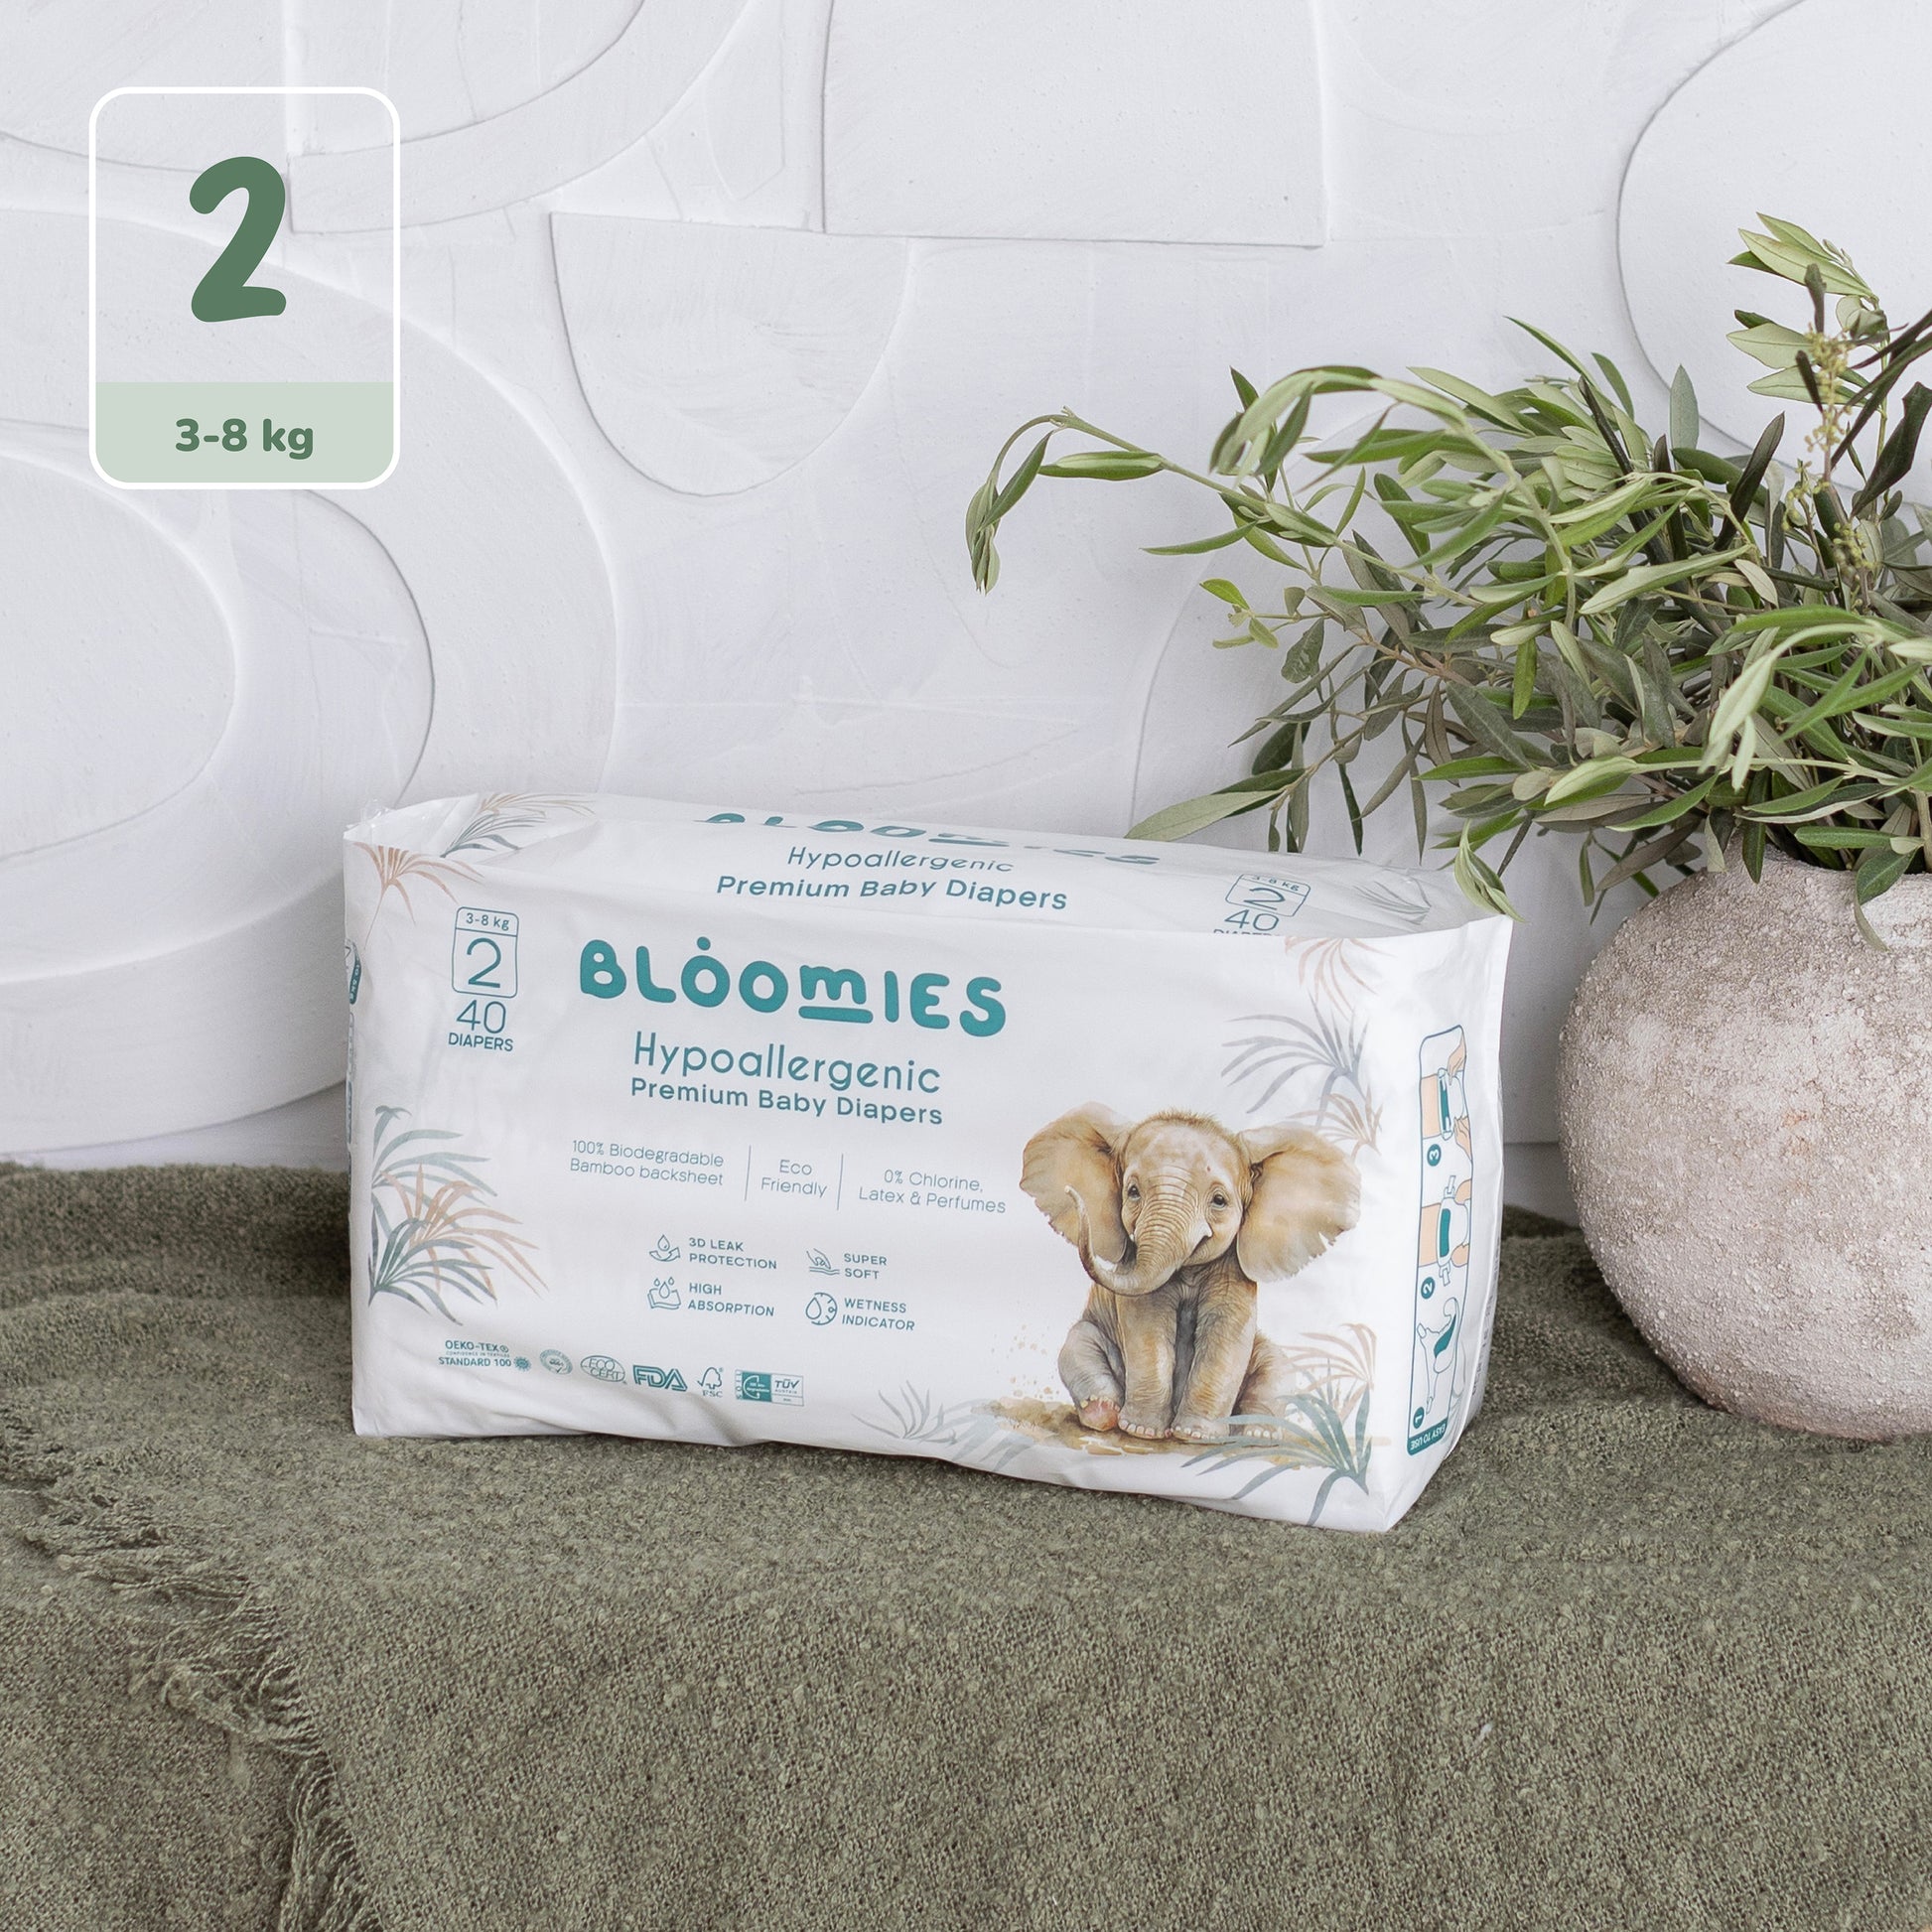 3.	Premium Baby Diapers - Size 2 box with pot